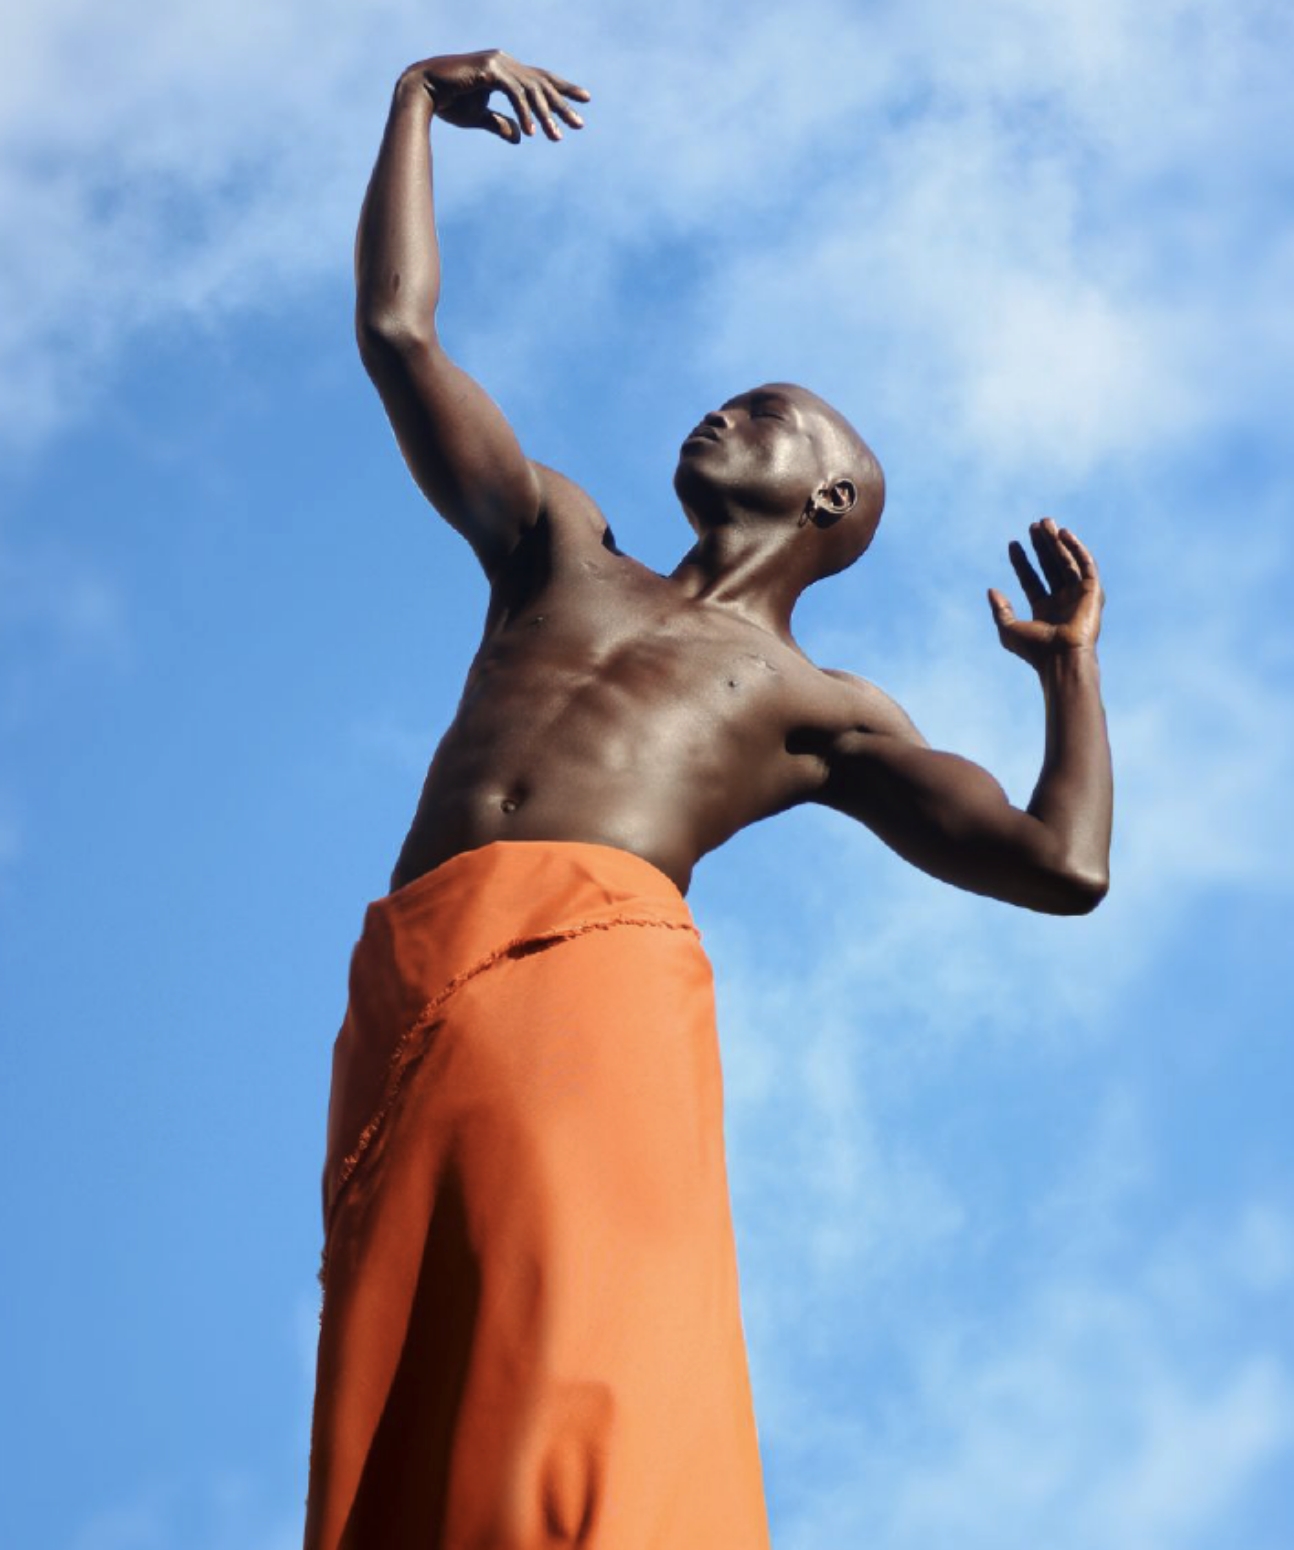 Photograph of a richly-pigmented Black figure whose lower body is wrapped in orange cloth, posing against the backdrop of a blue sky.